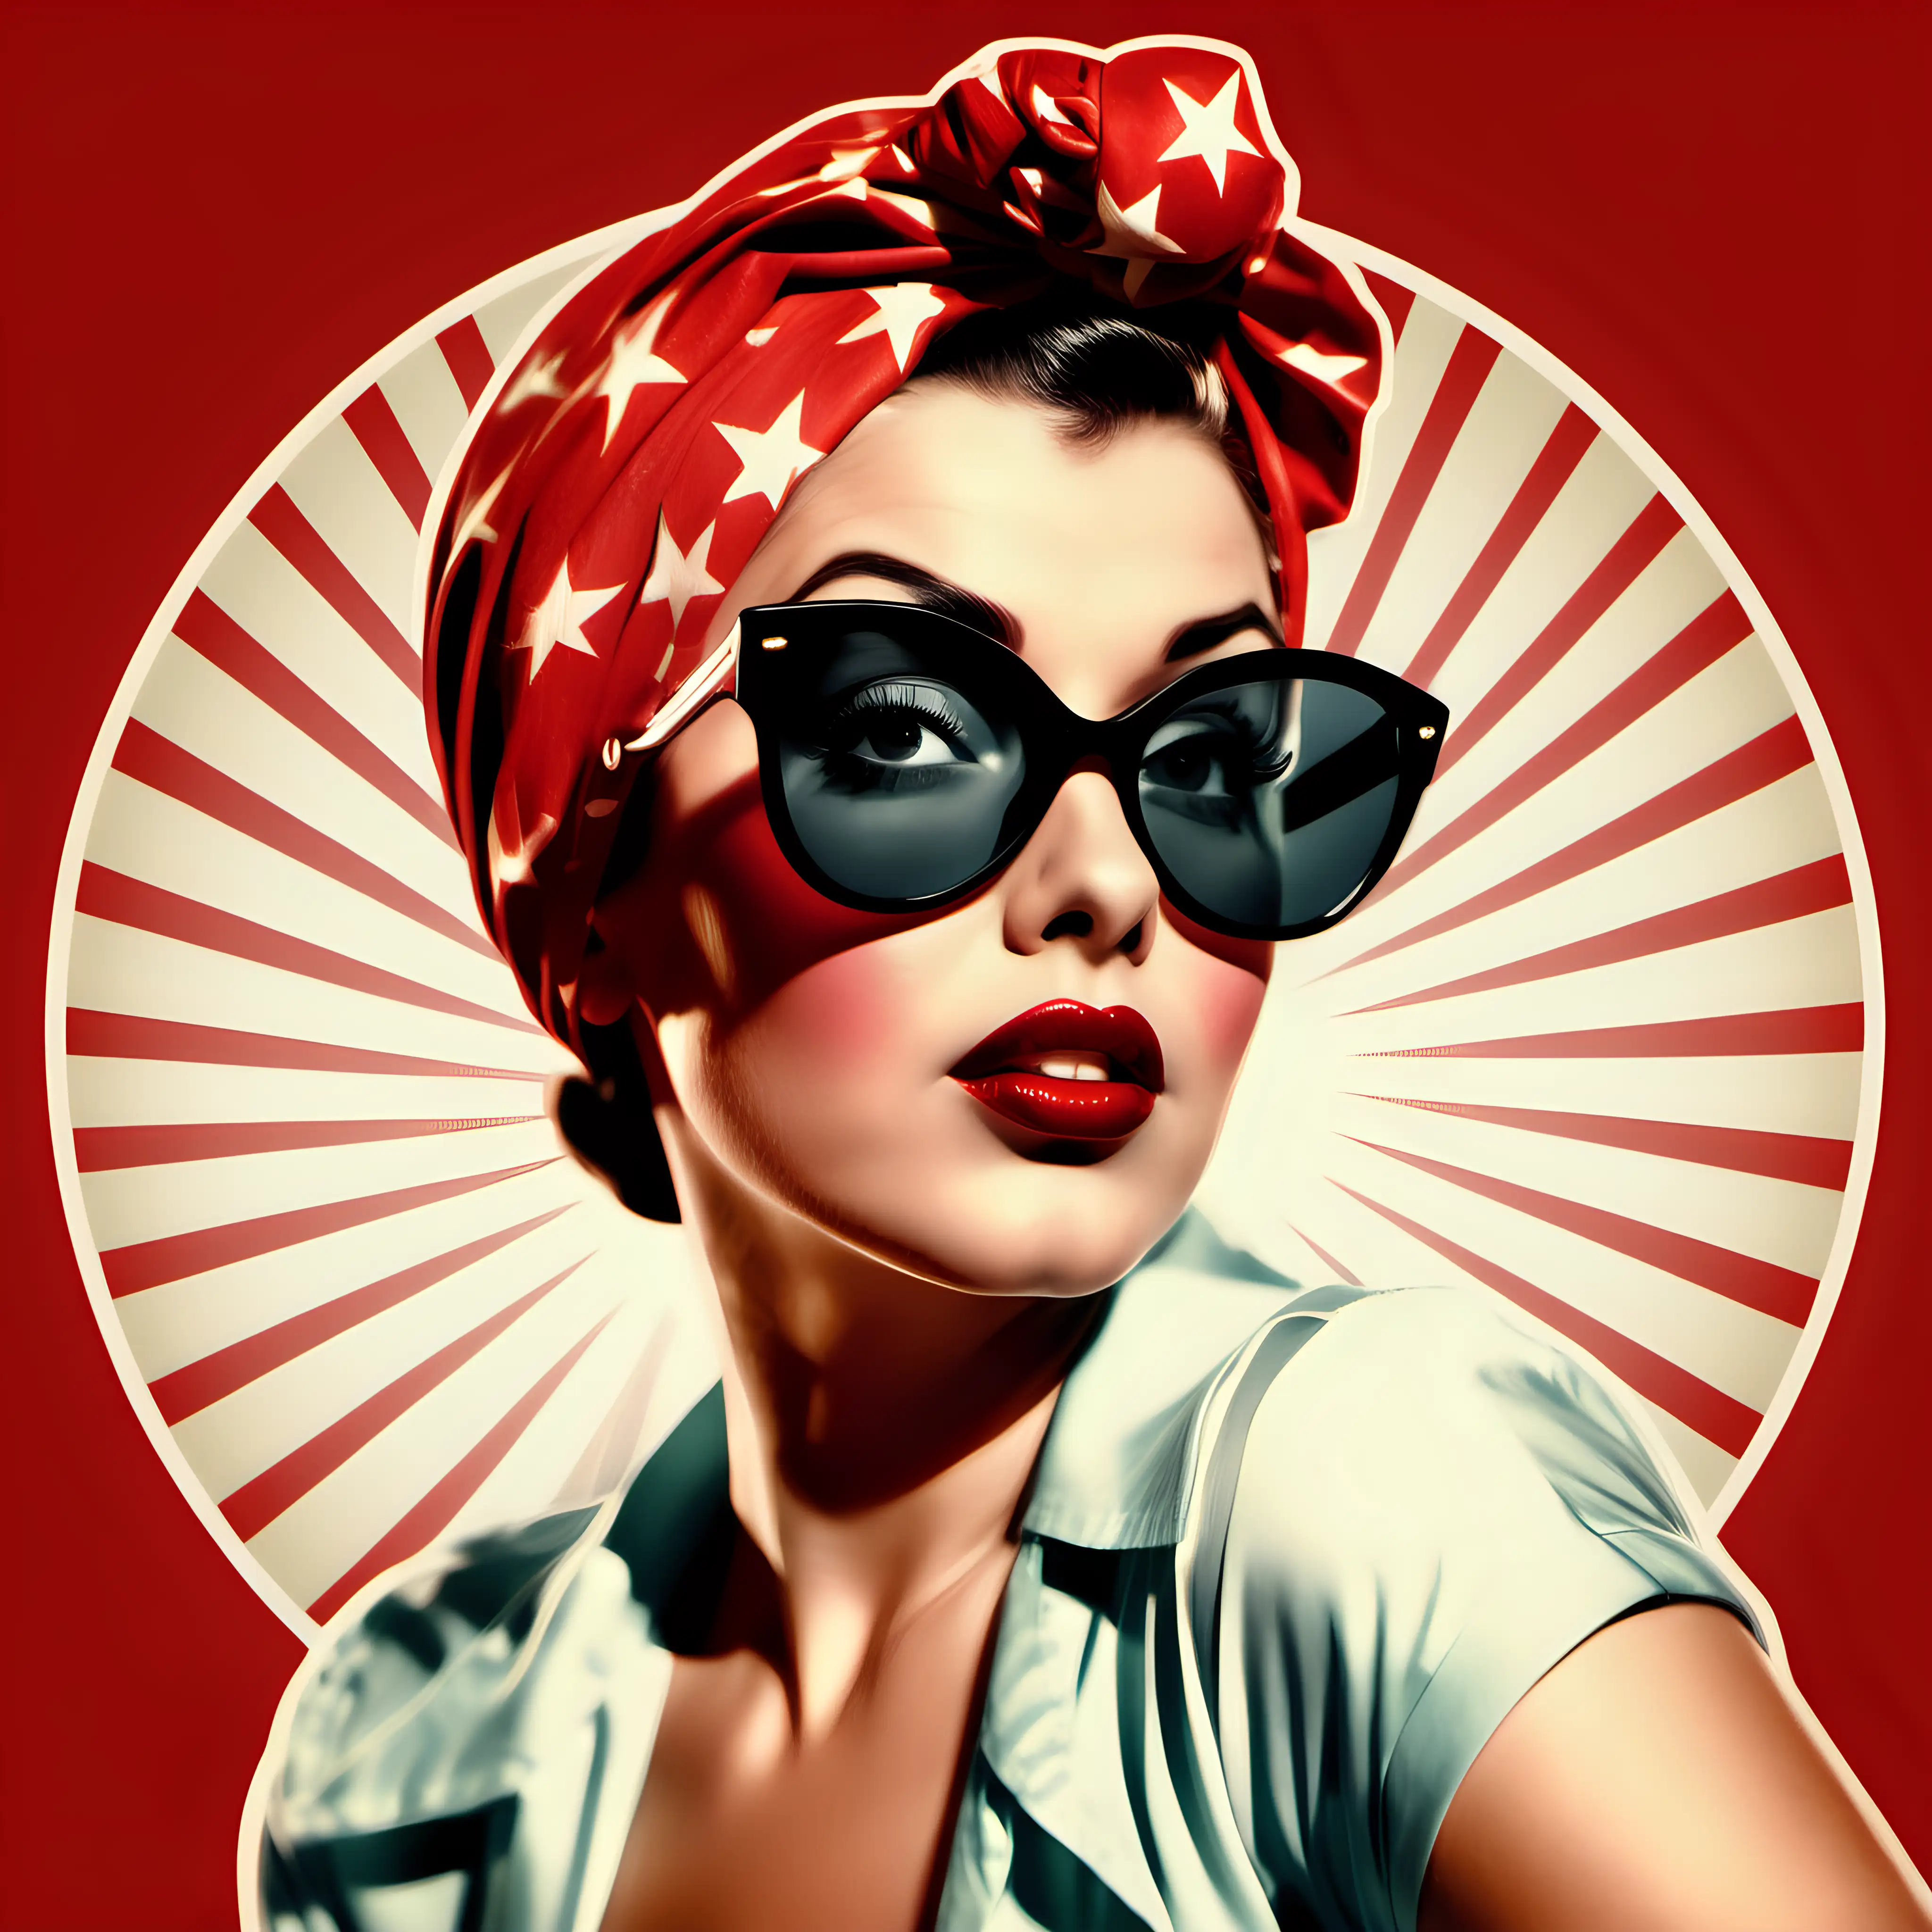  Woman with flare and a determined look, in a sassy pose, red glossy lips, big dark sunglasses and a head scarf Hollywood style. Hollywood Pinup style of the 1940's. vintage. circle behind the womans head. illustration